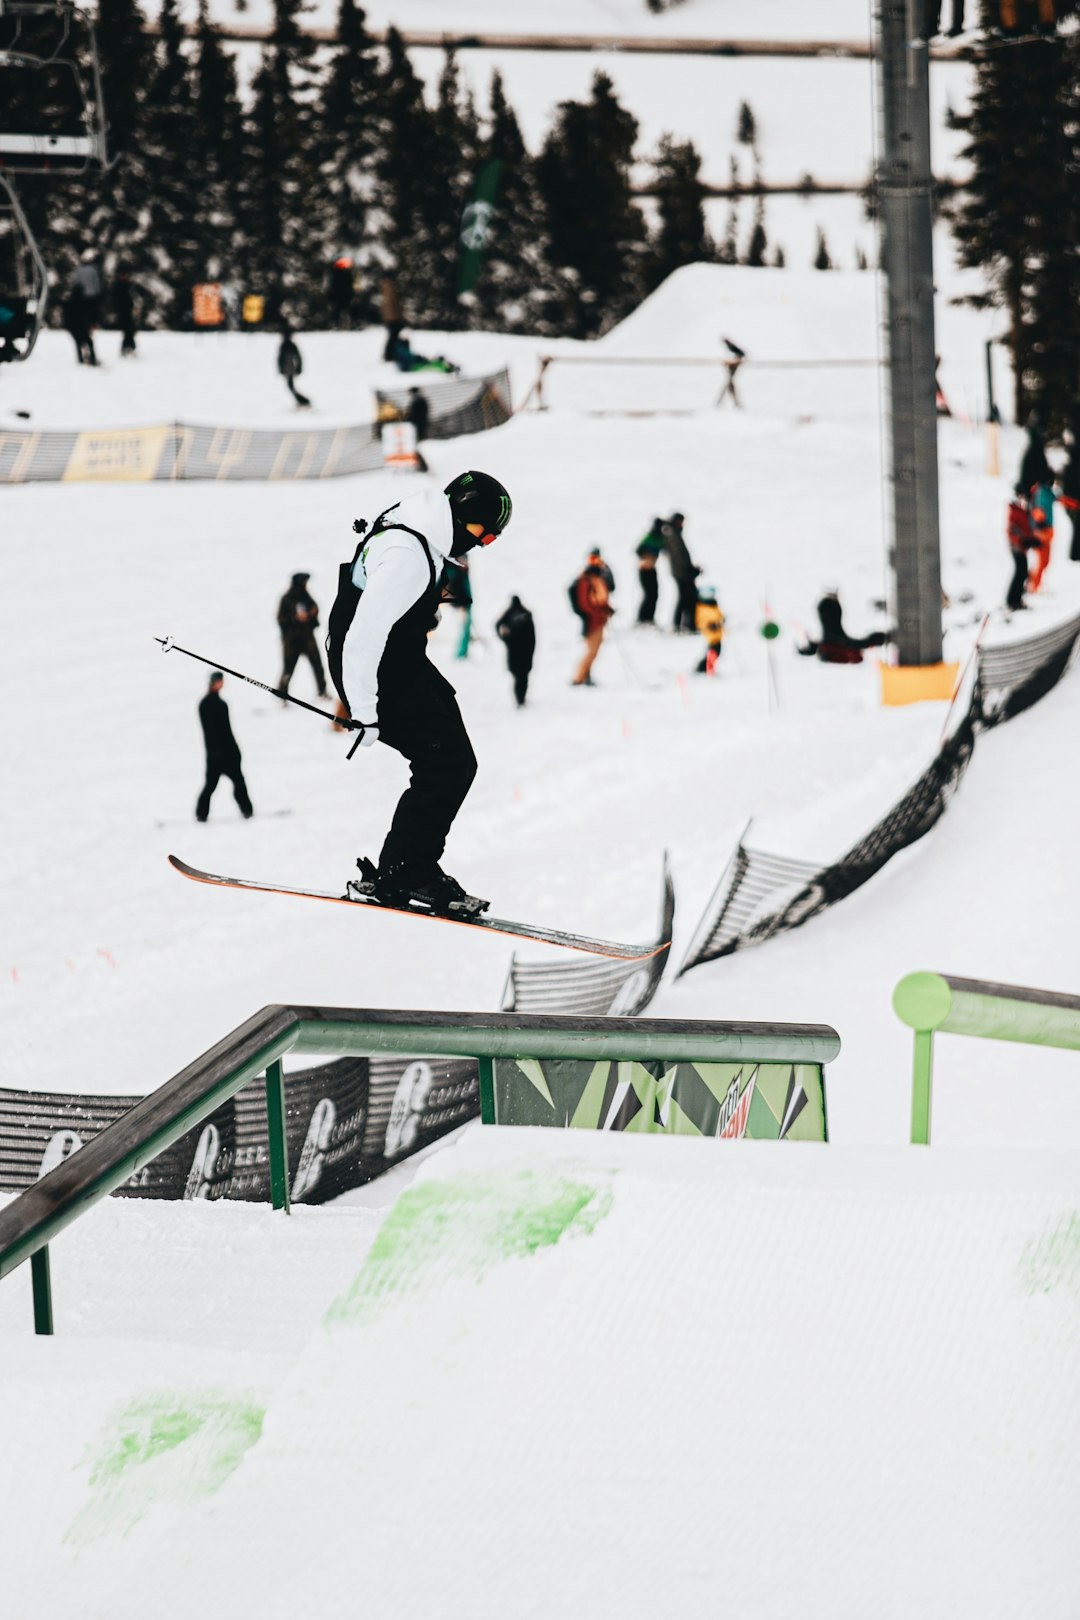 man in black jacket and black pants riding on black and white snowboard during daytime